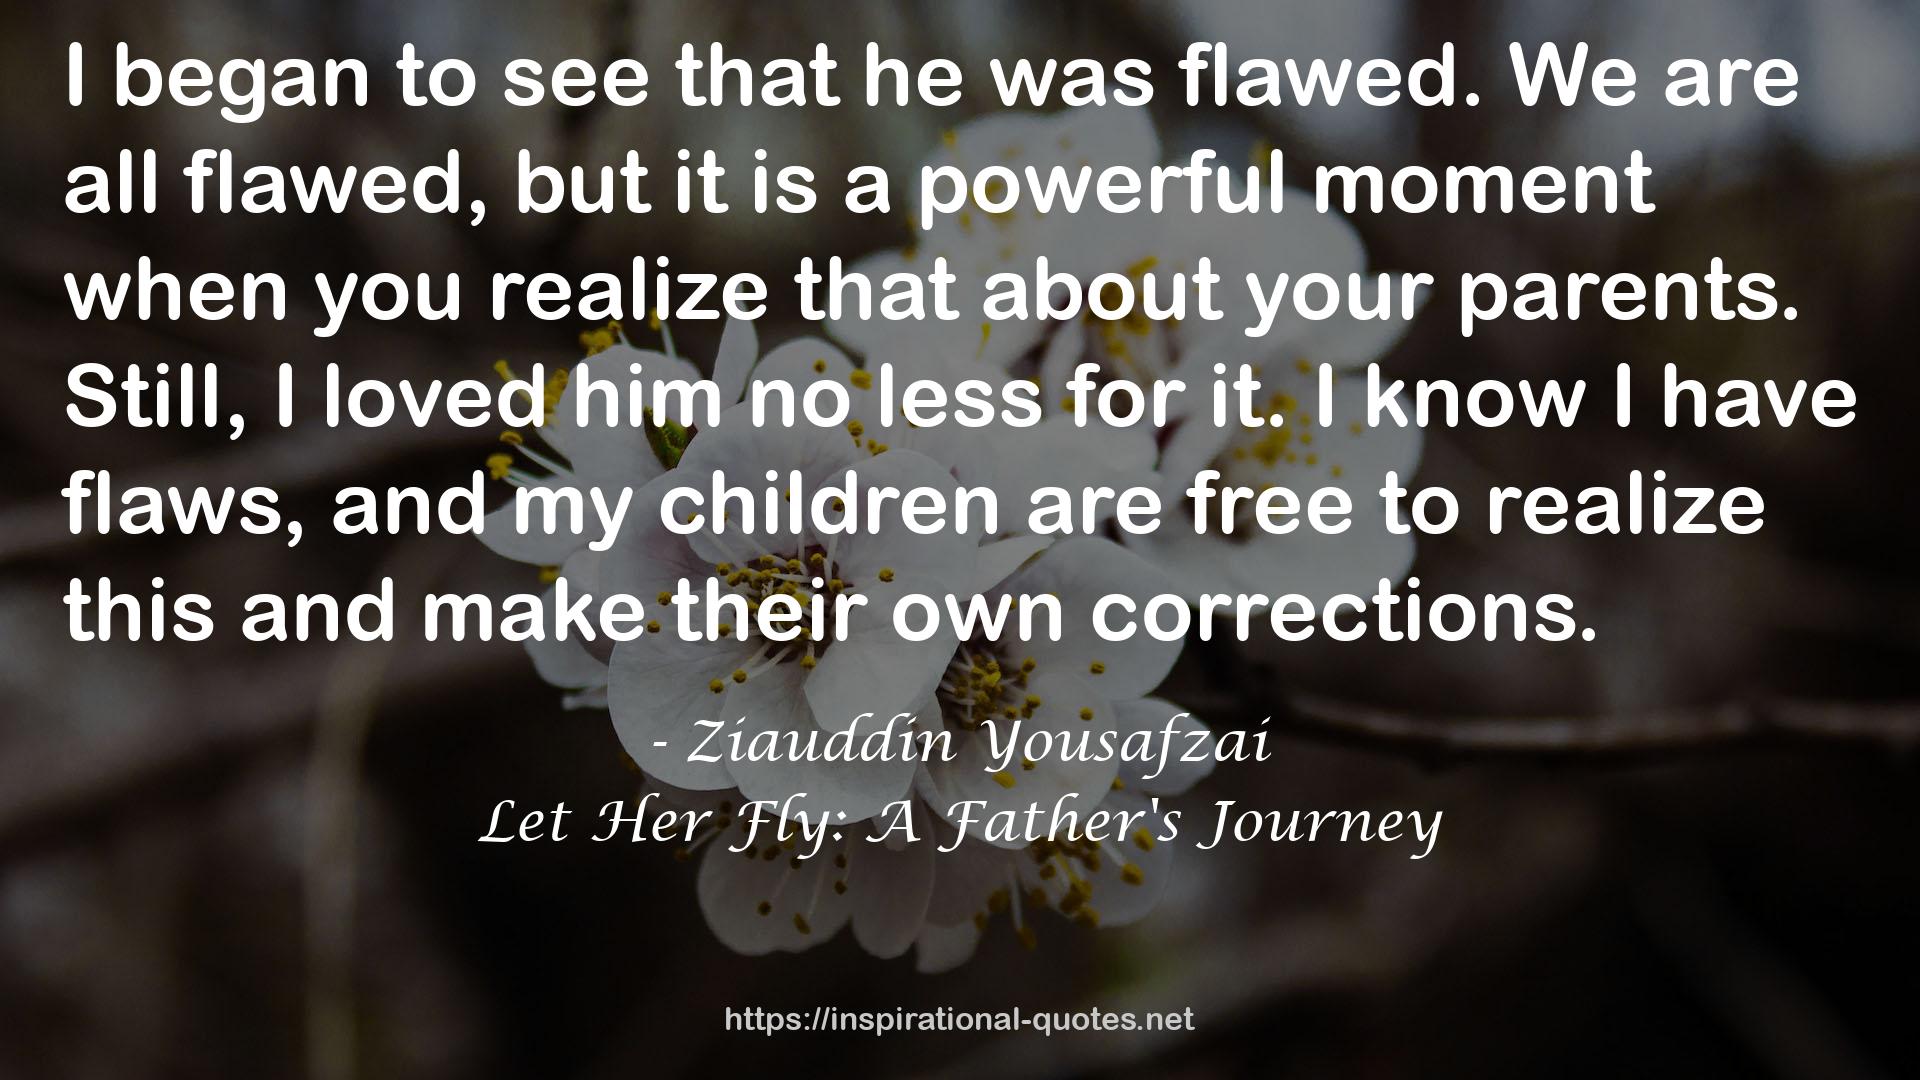 Let Her Fly: A Father's Journey QUOTES